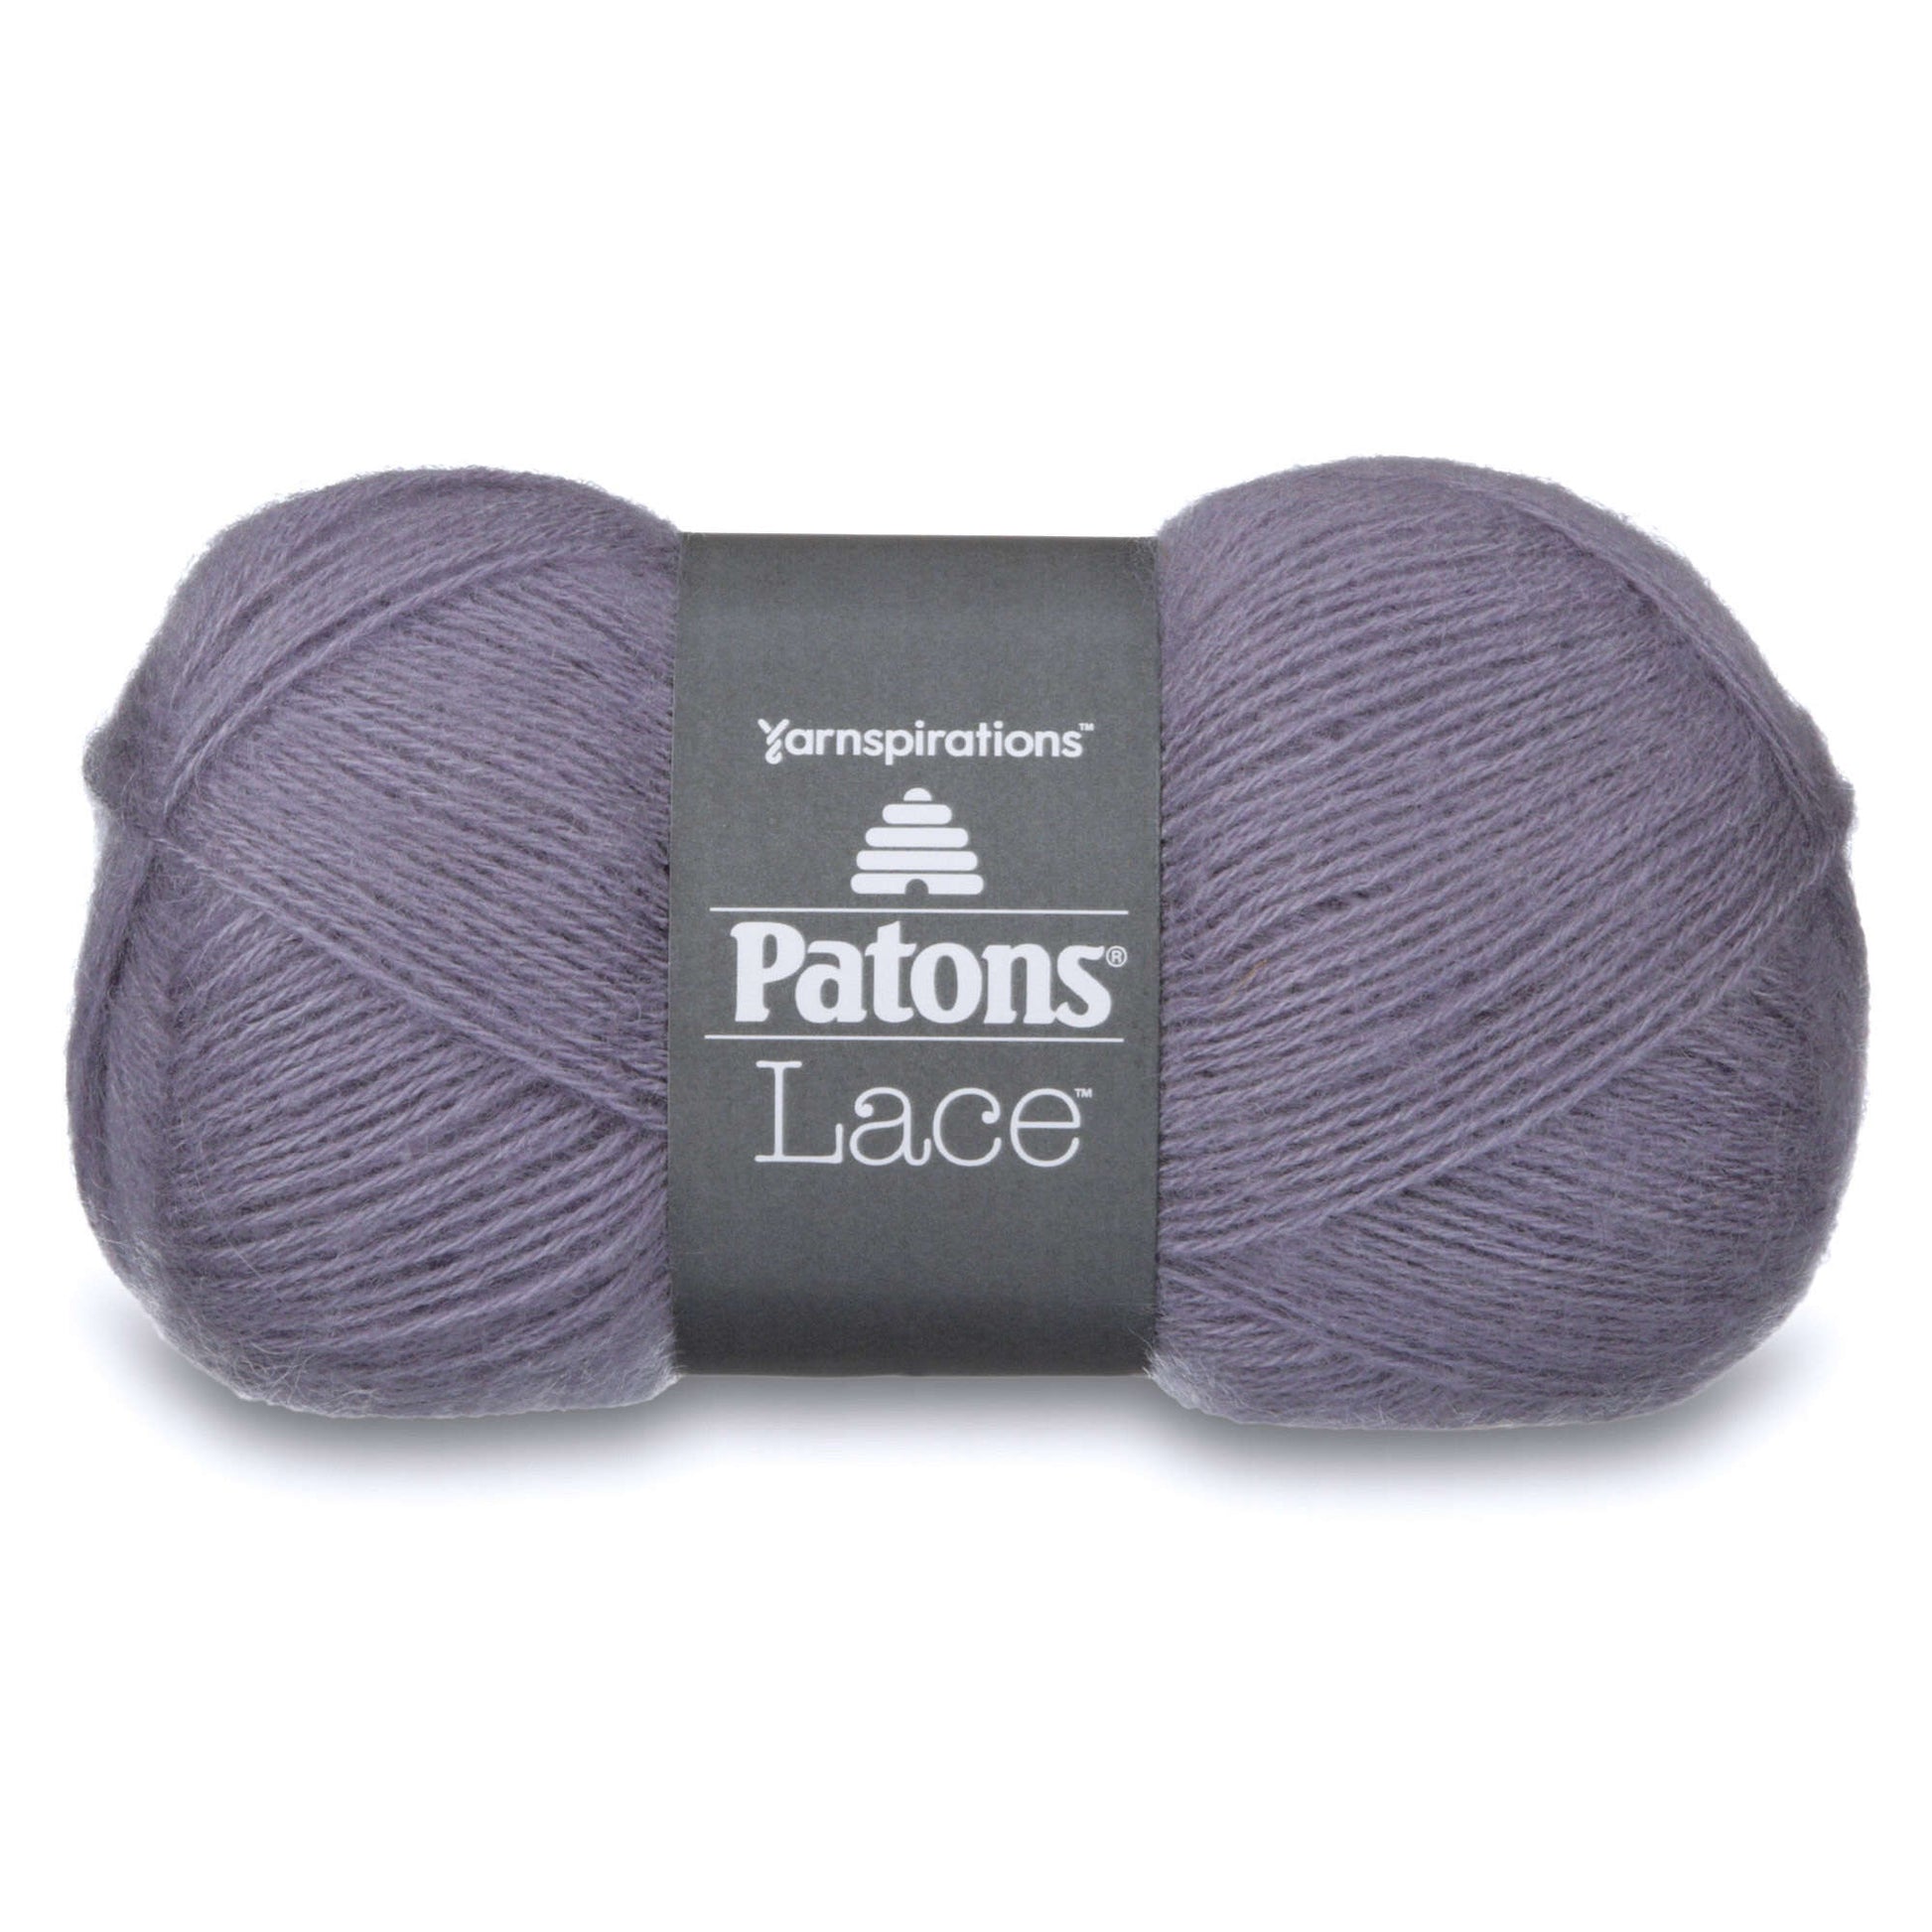 Patons Lace Yarn - Discontinued